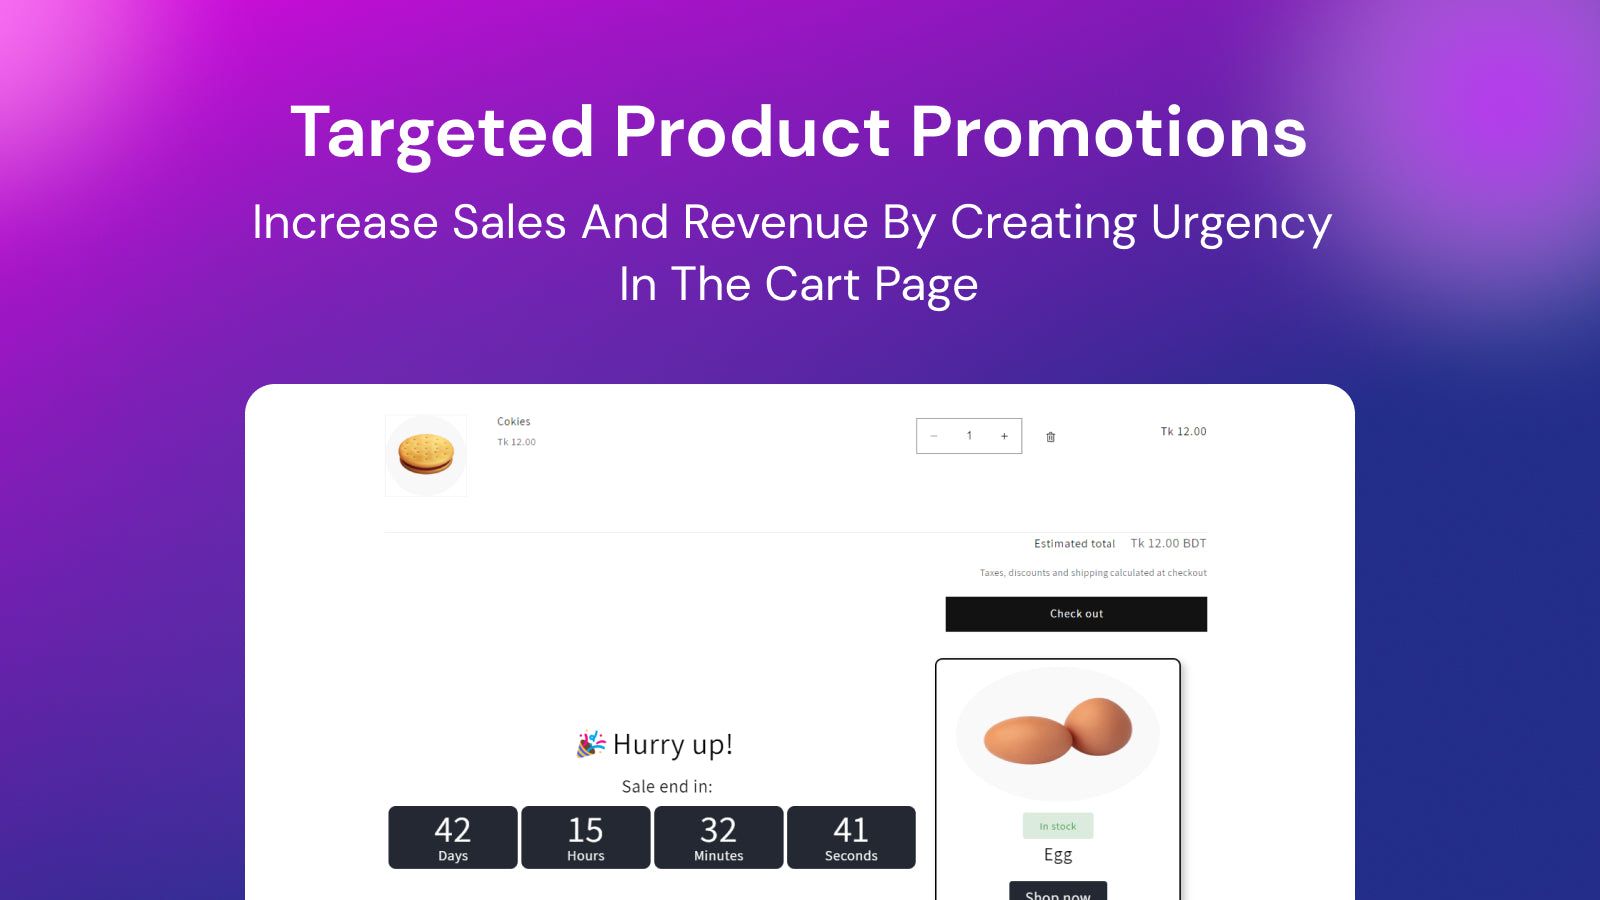 Targeted Product Promotions in Cart Page